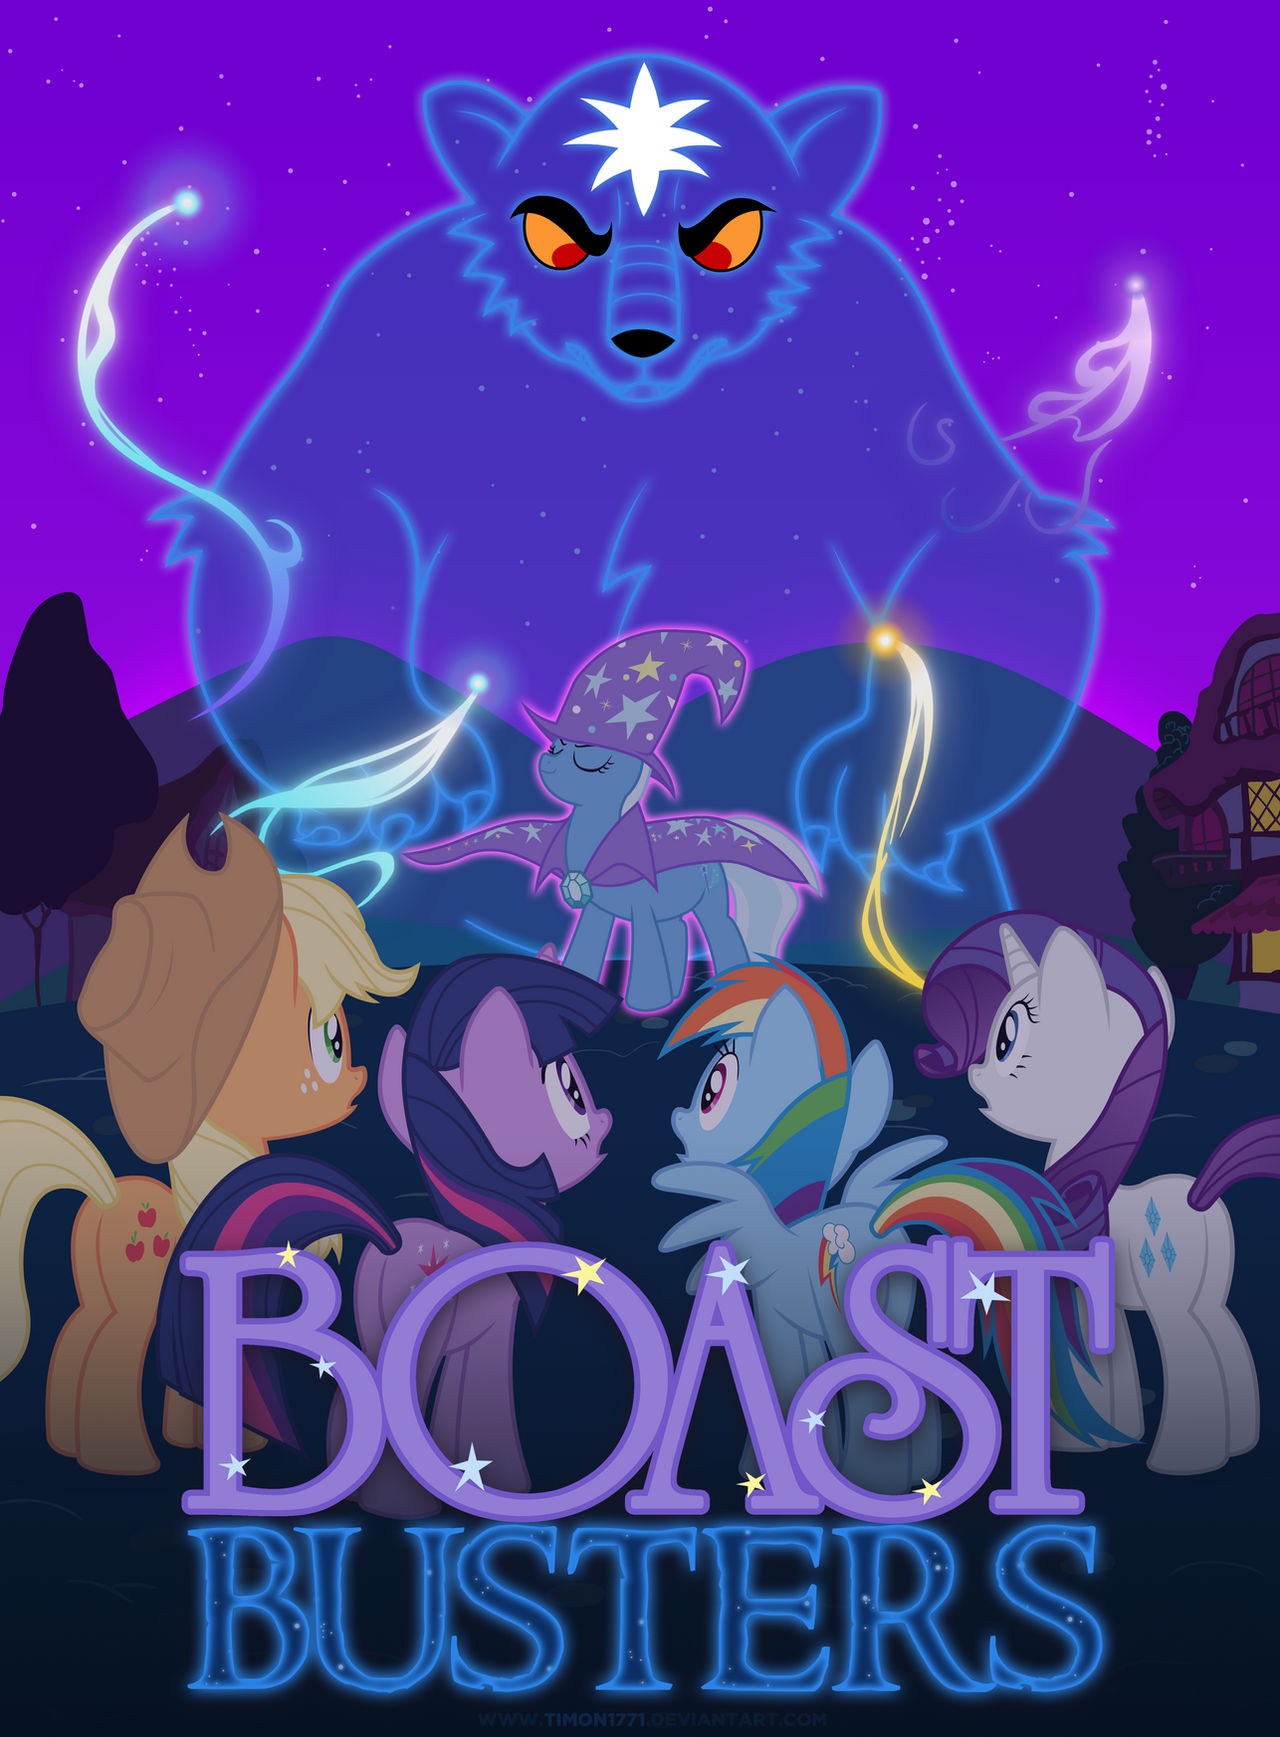 Boast Busters Movie Poster